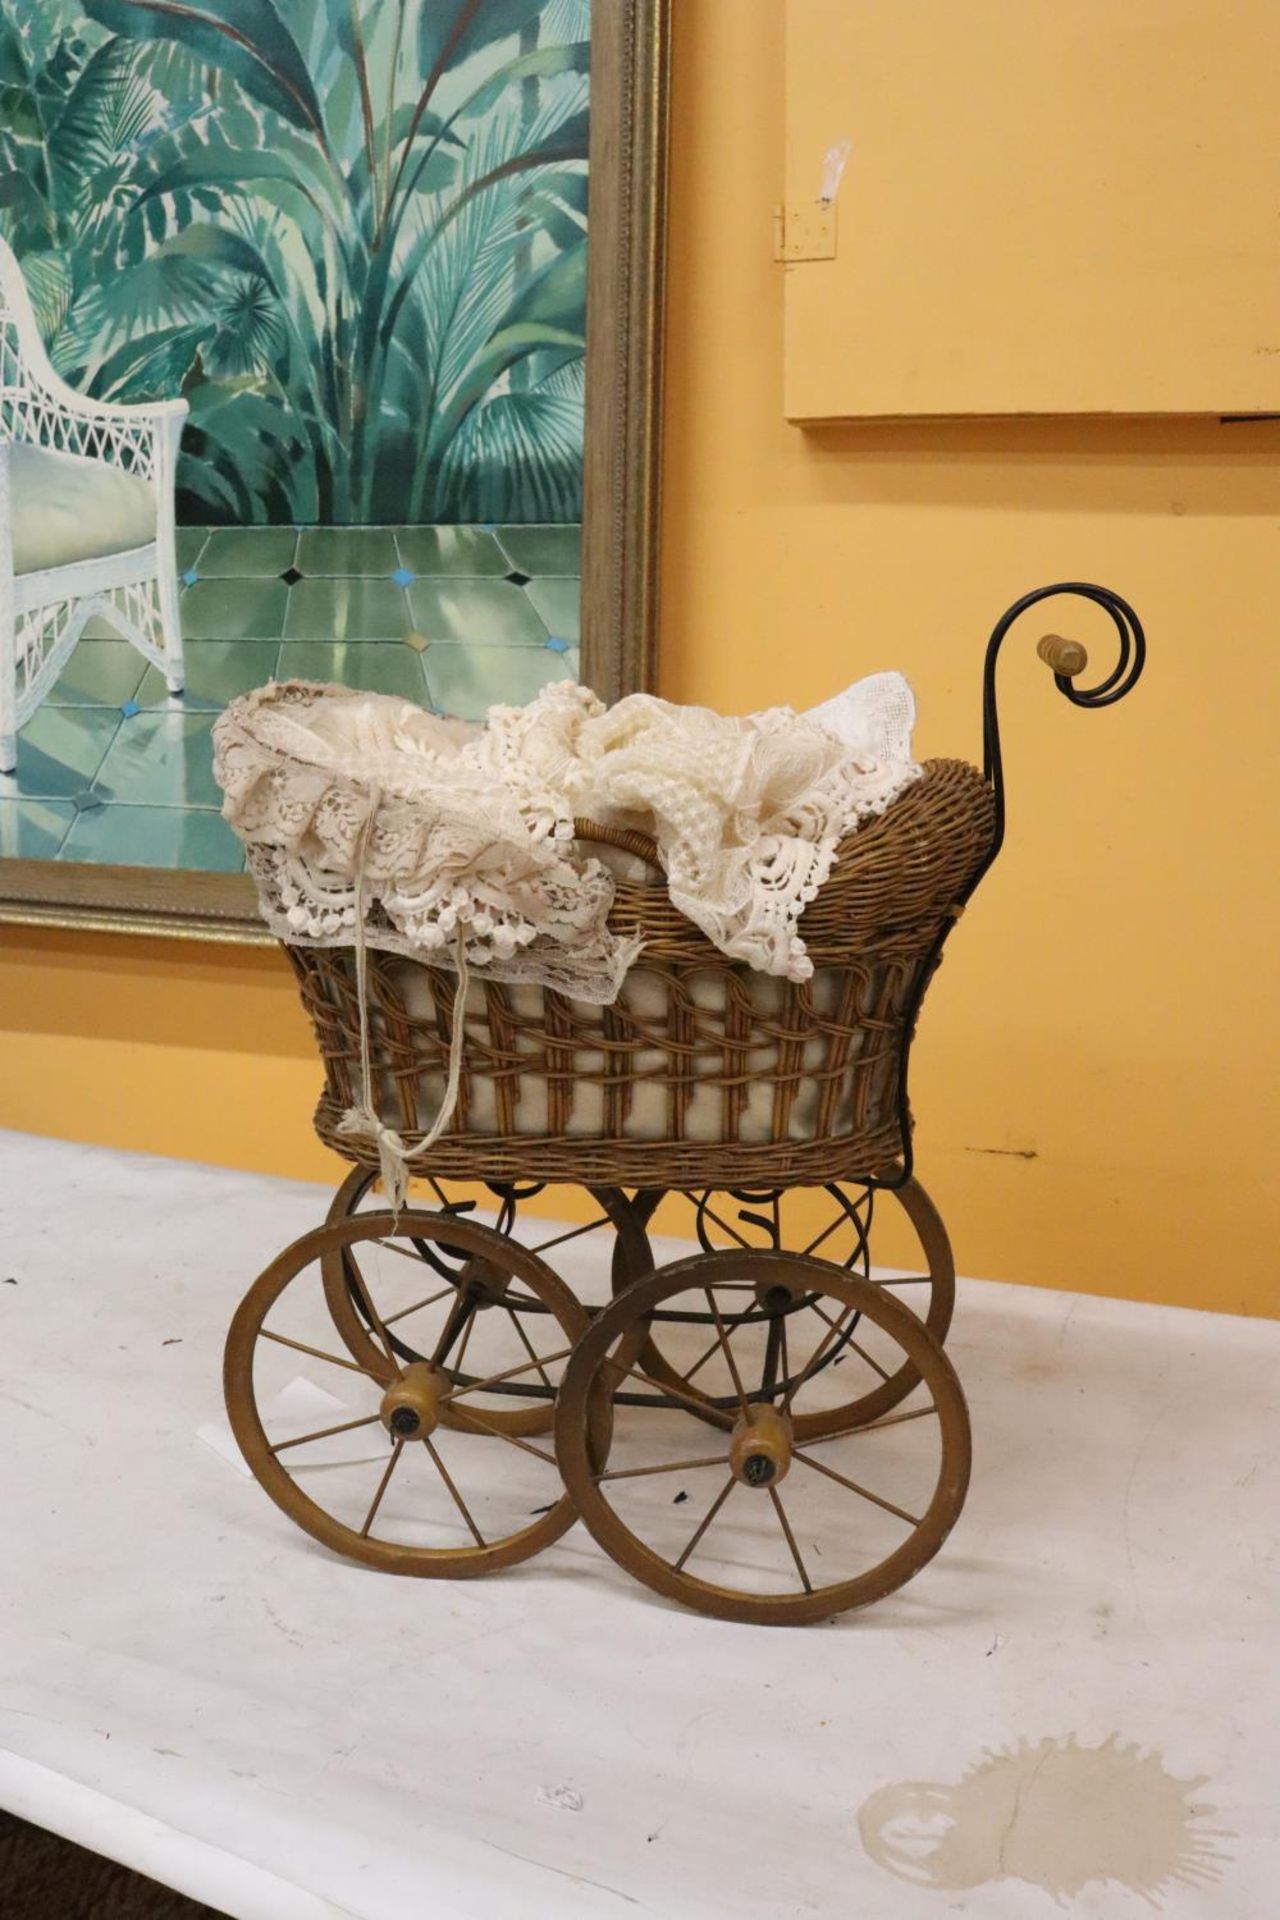 A VICTORIAN CHILD'S PRAM WITH LACE COVERS - Image 4 of 5